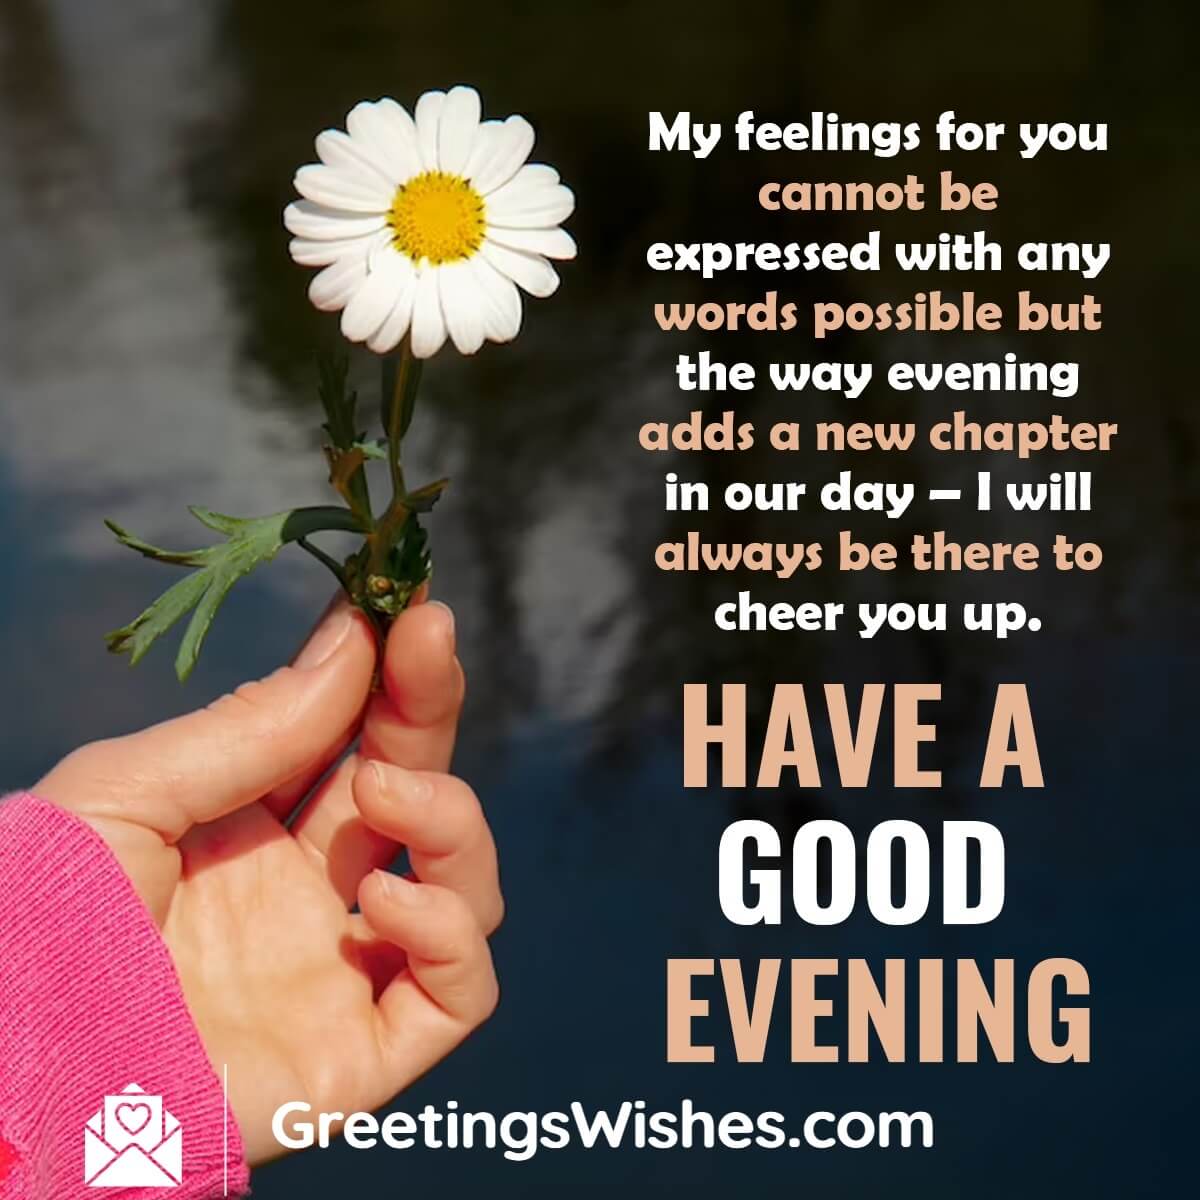 Good Evening Wishes - Greetings Wishes